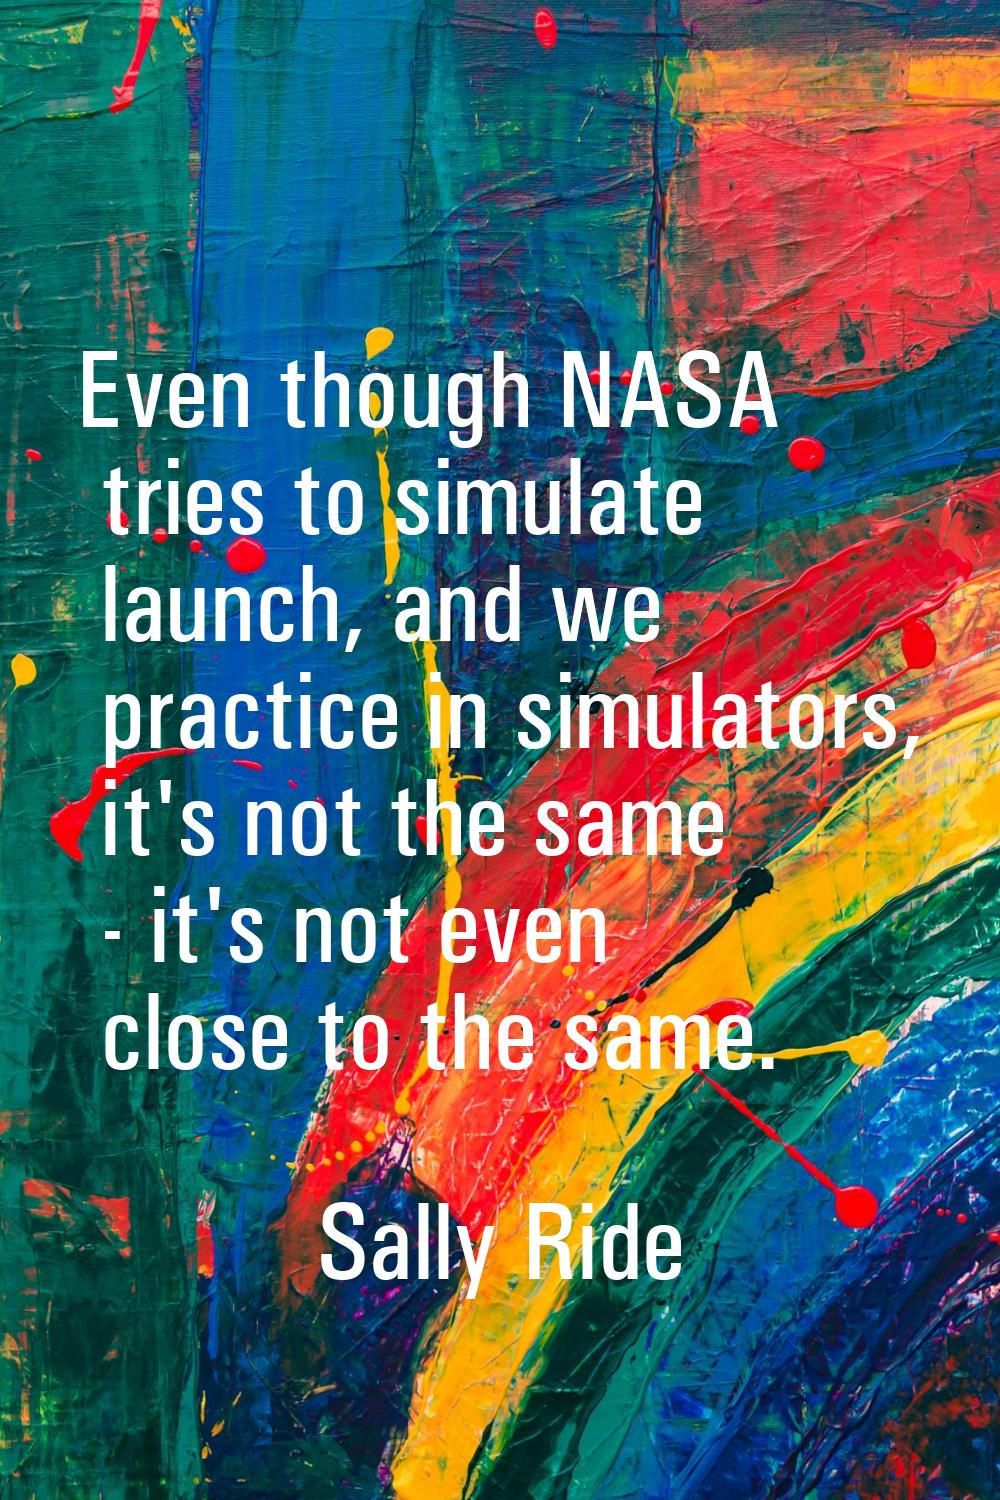 Even though NASA tries to simulate launch, and we practice in simulators, it's not the same - it's 